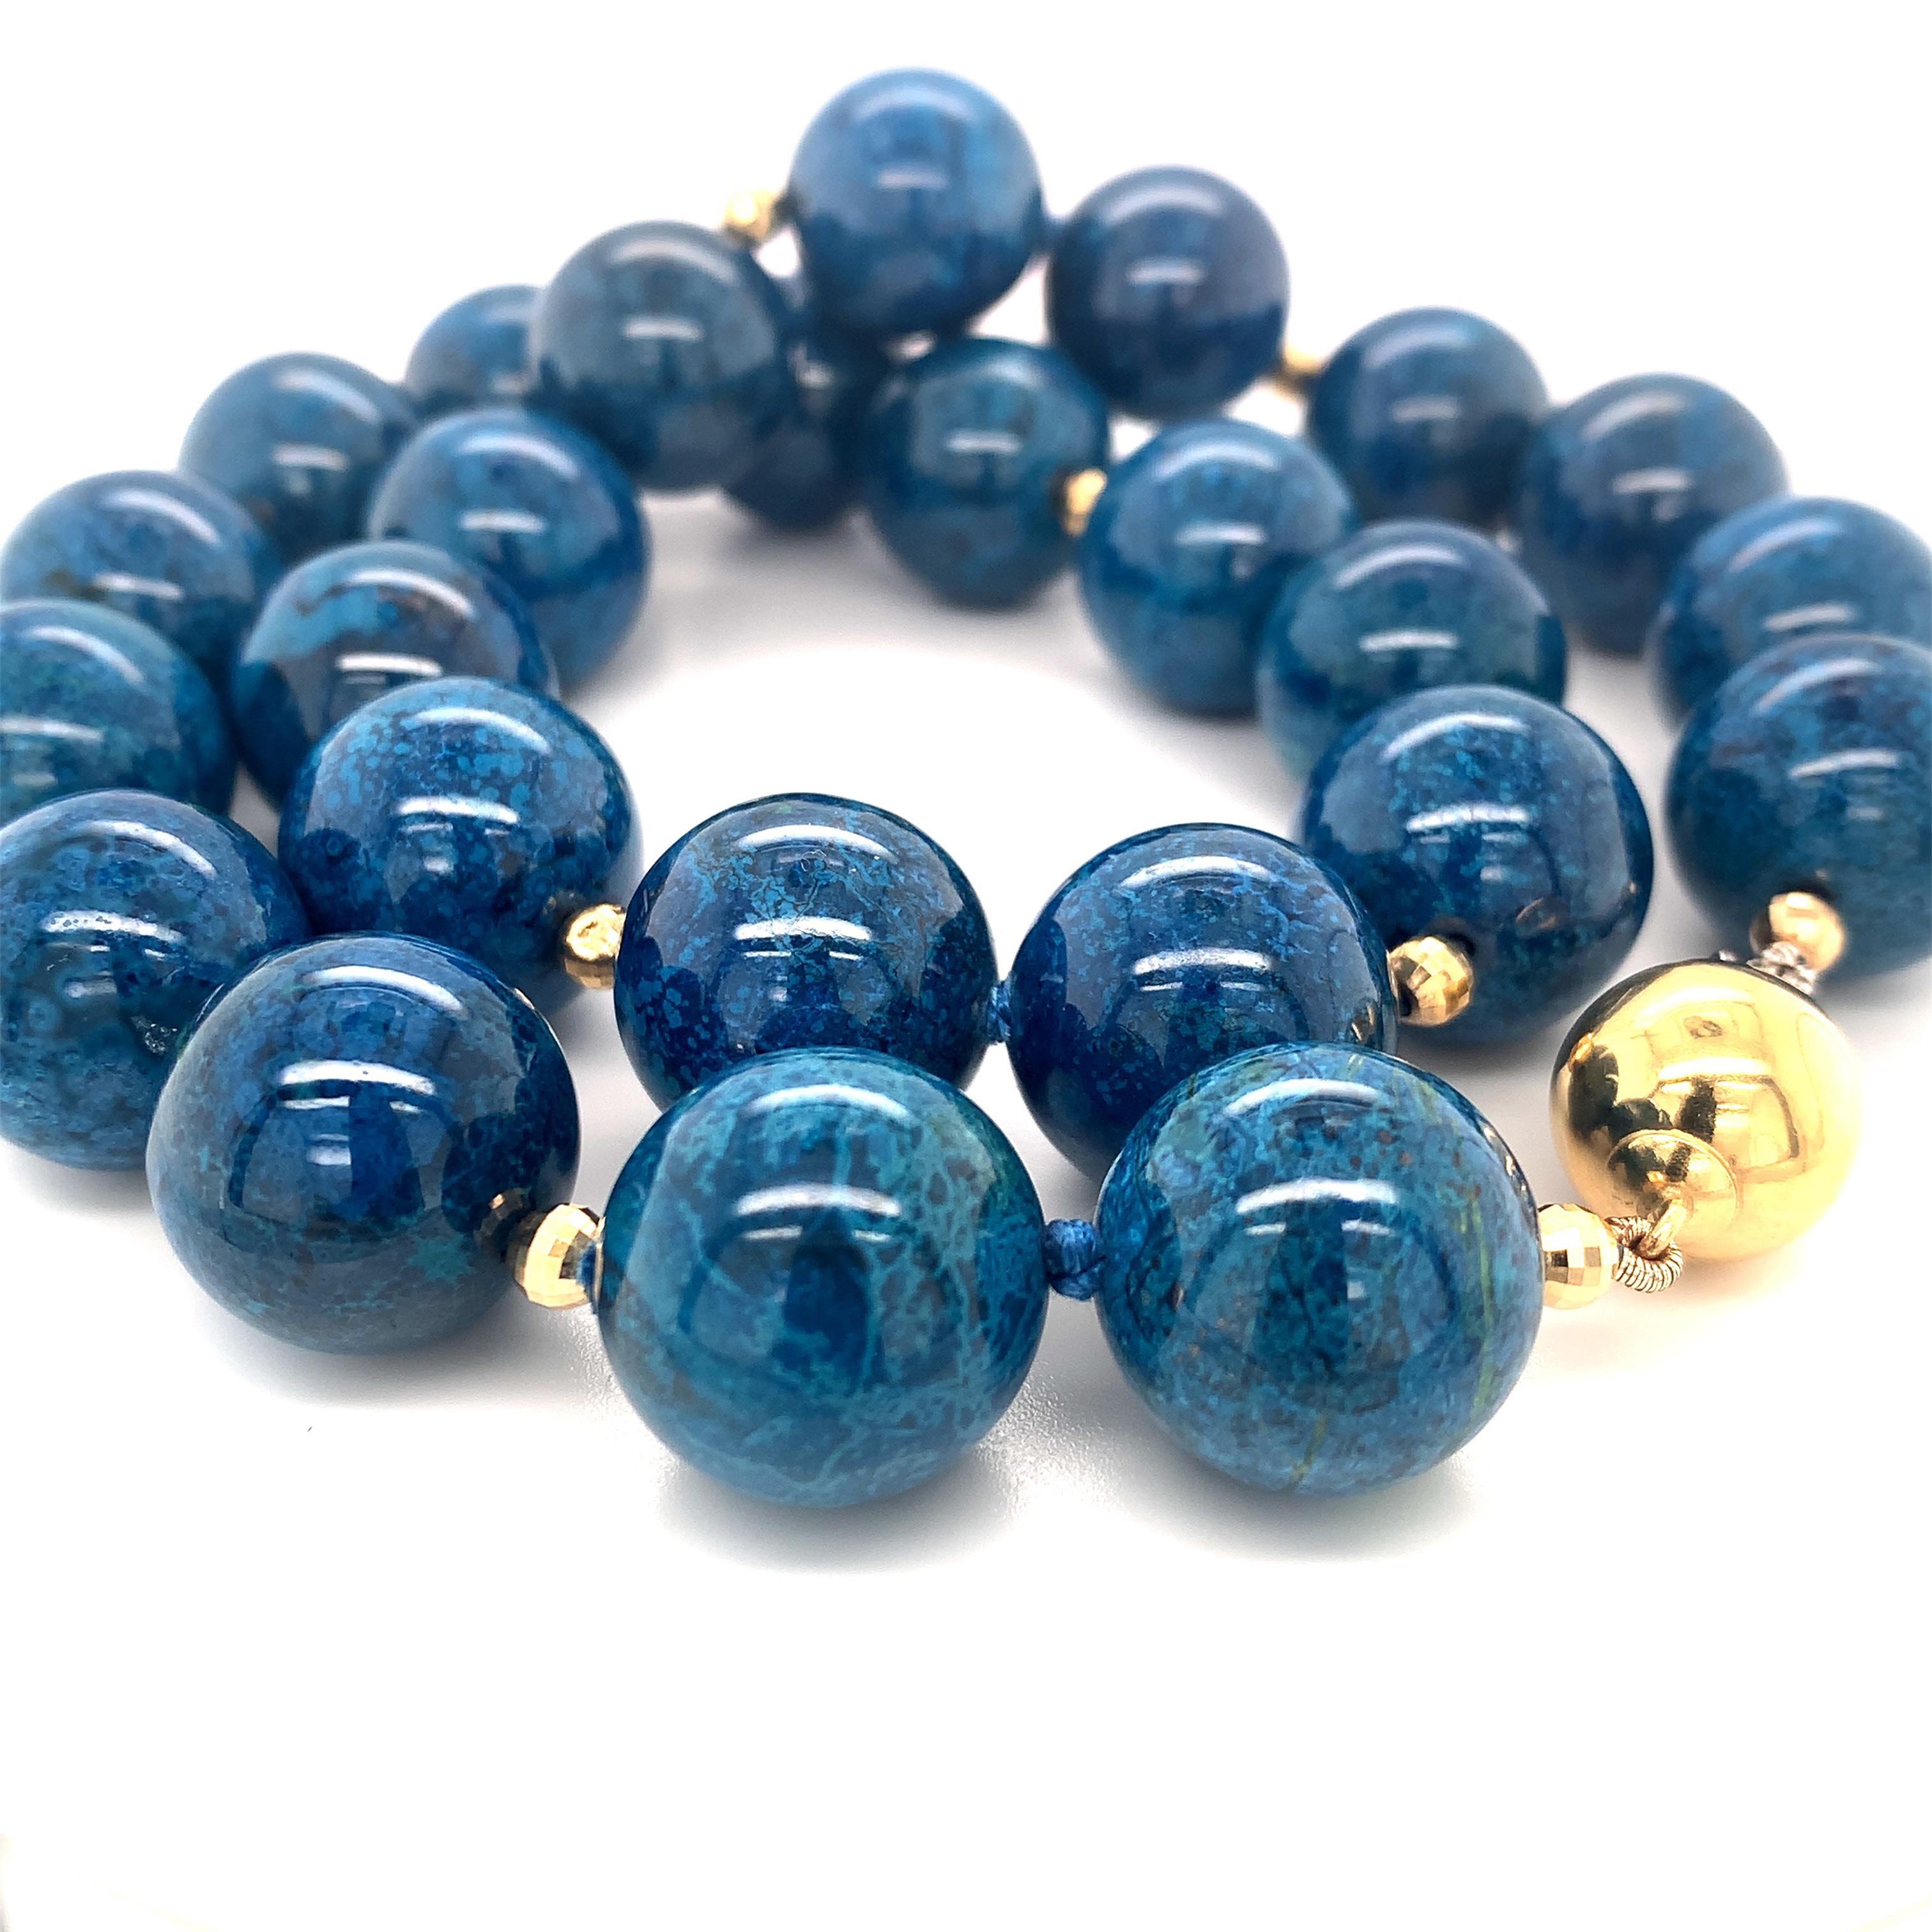 This impressive strand of 16mm round chrysocolla beads will put the finishing touch on any outfit! These beads have gorgeous color and variegated mottling displaying a beautiful combination rich cobalt blue, royal navy, and aqua tones. Shiny 14k